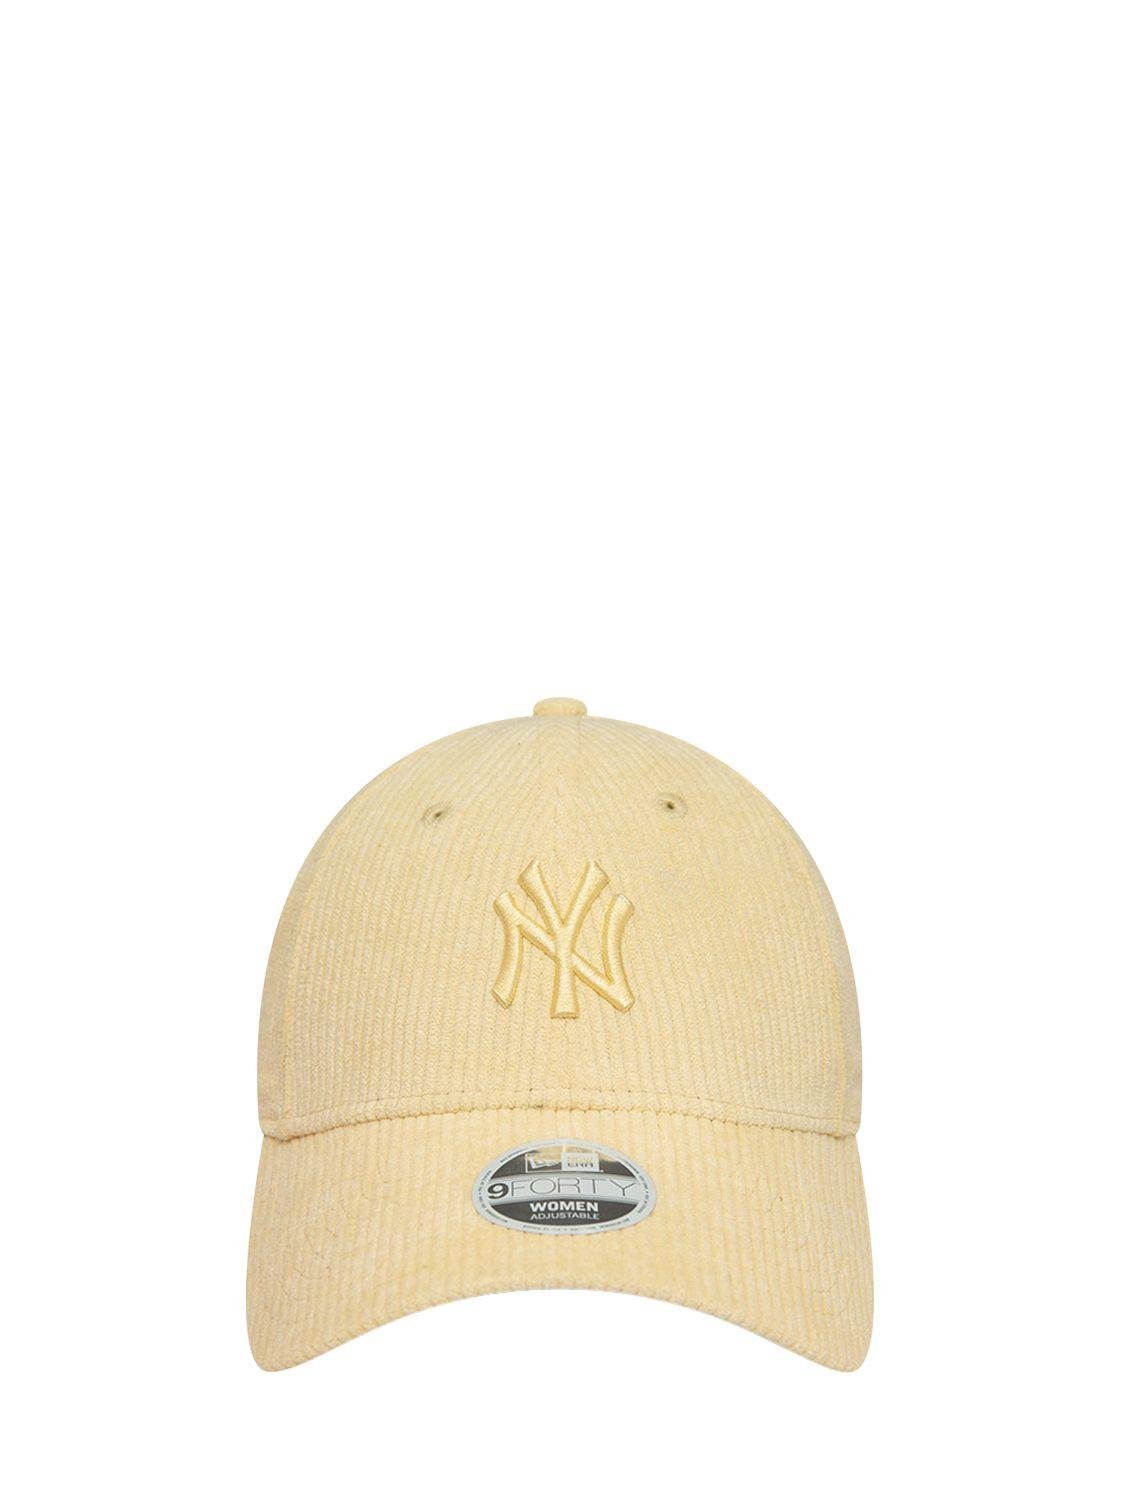 Ny Yankees Female Summer Cord 9forty Hat by NEW ERA